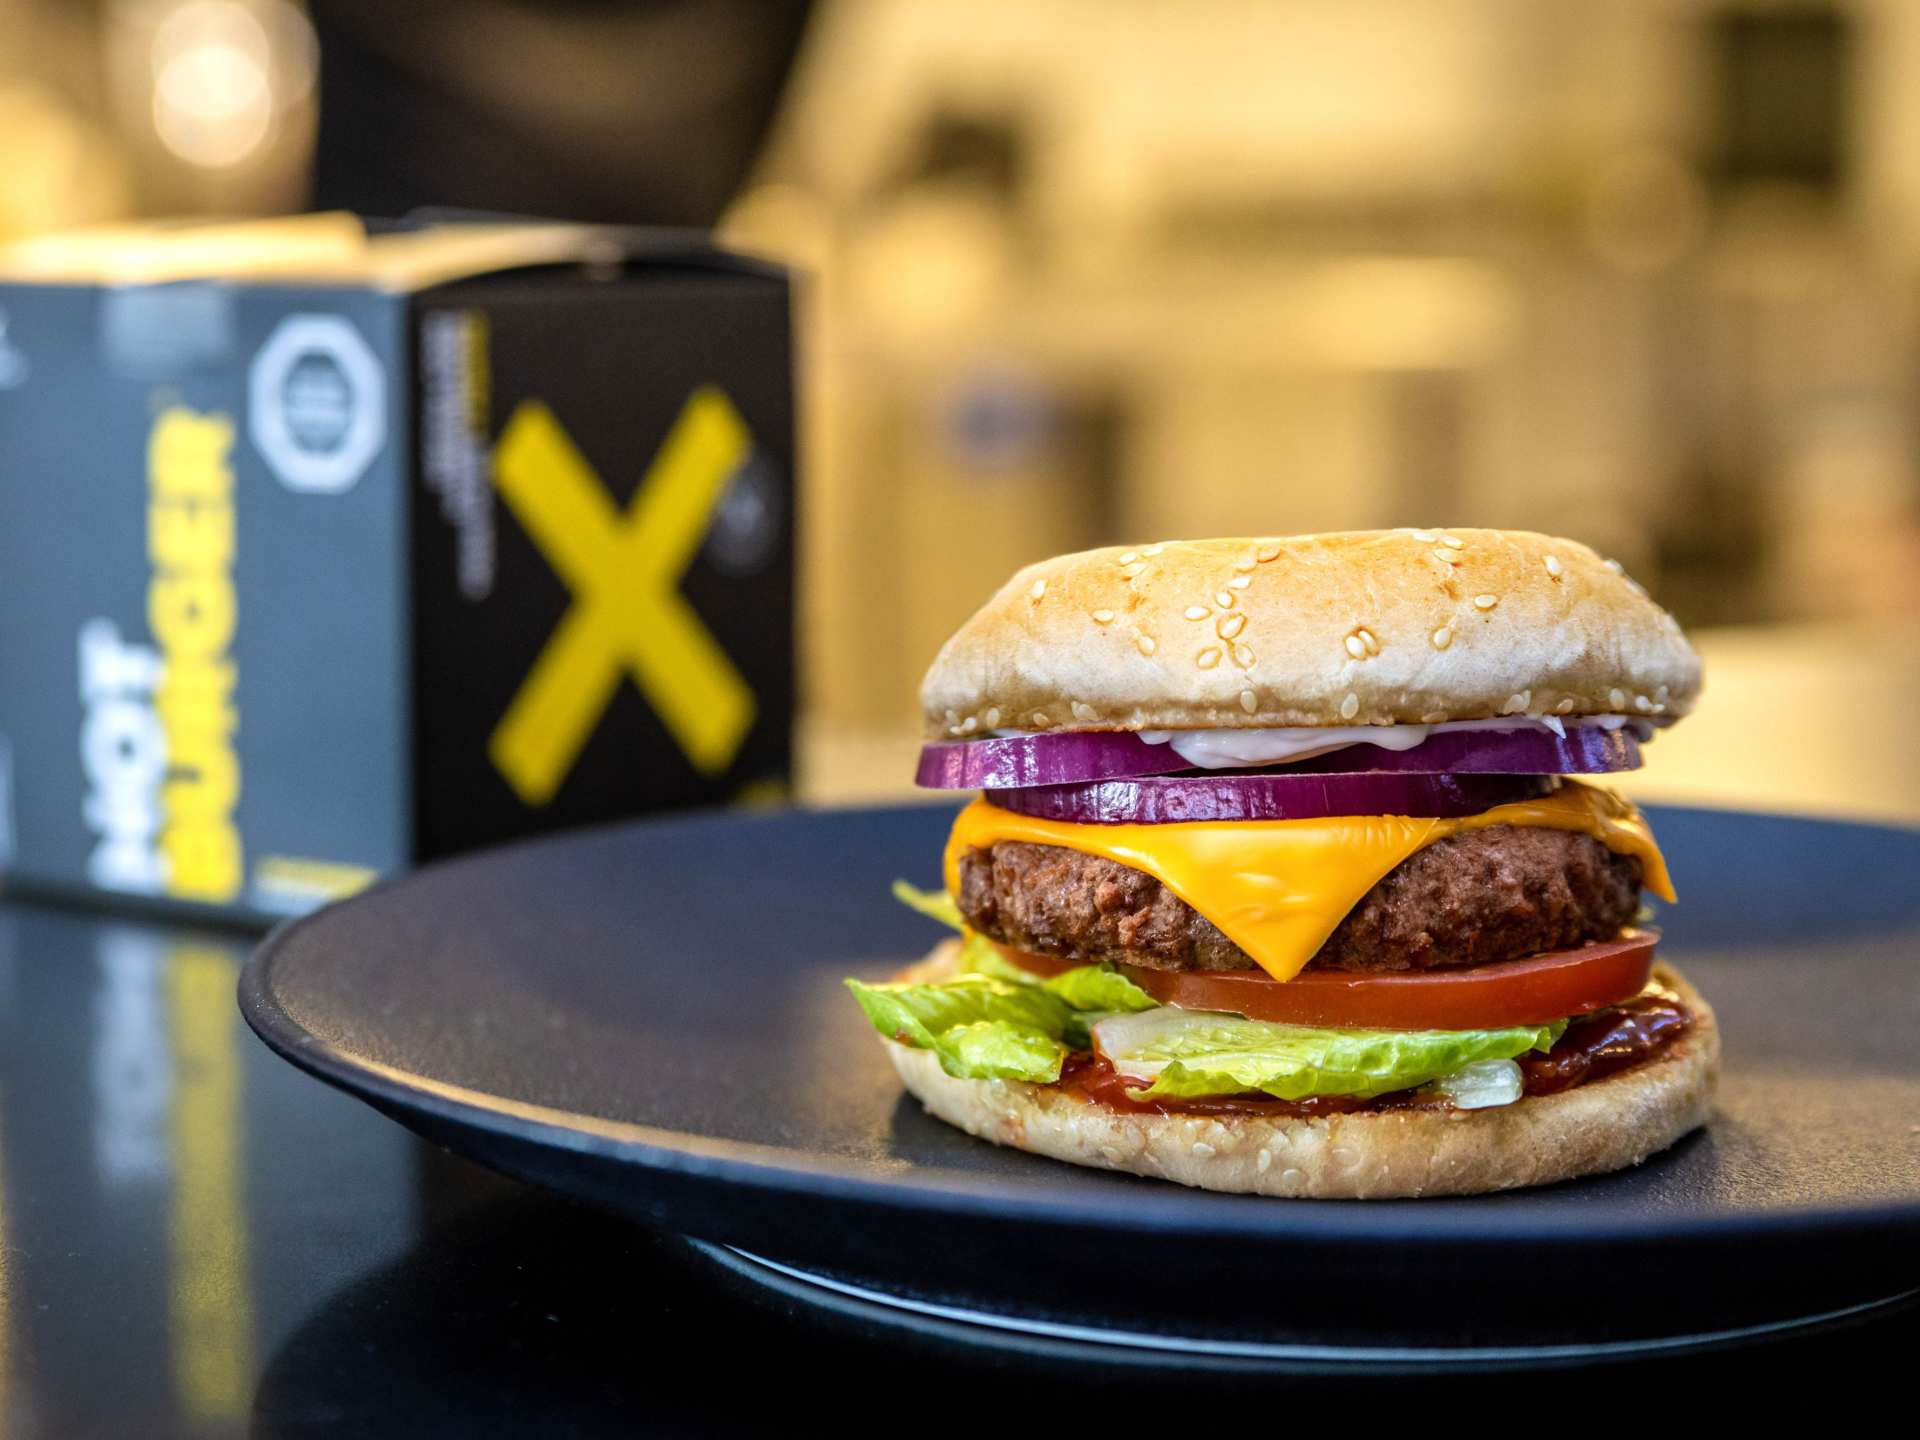 A NotCo burger on a plate and a NotCo burger box in the background